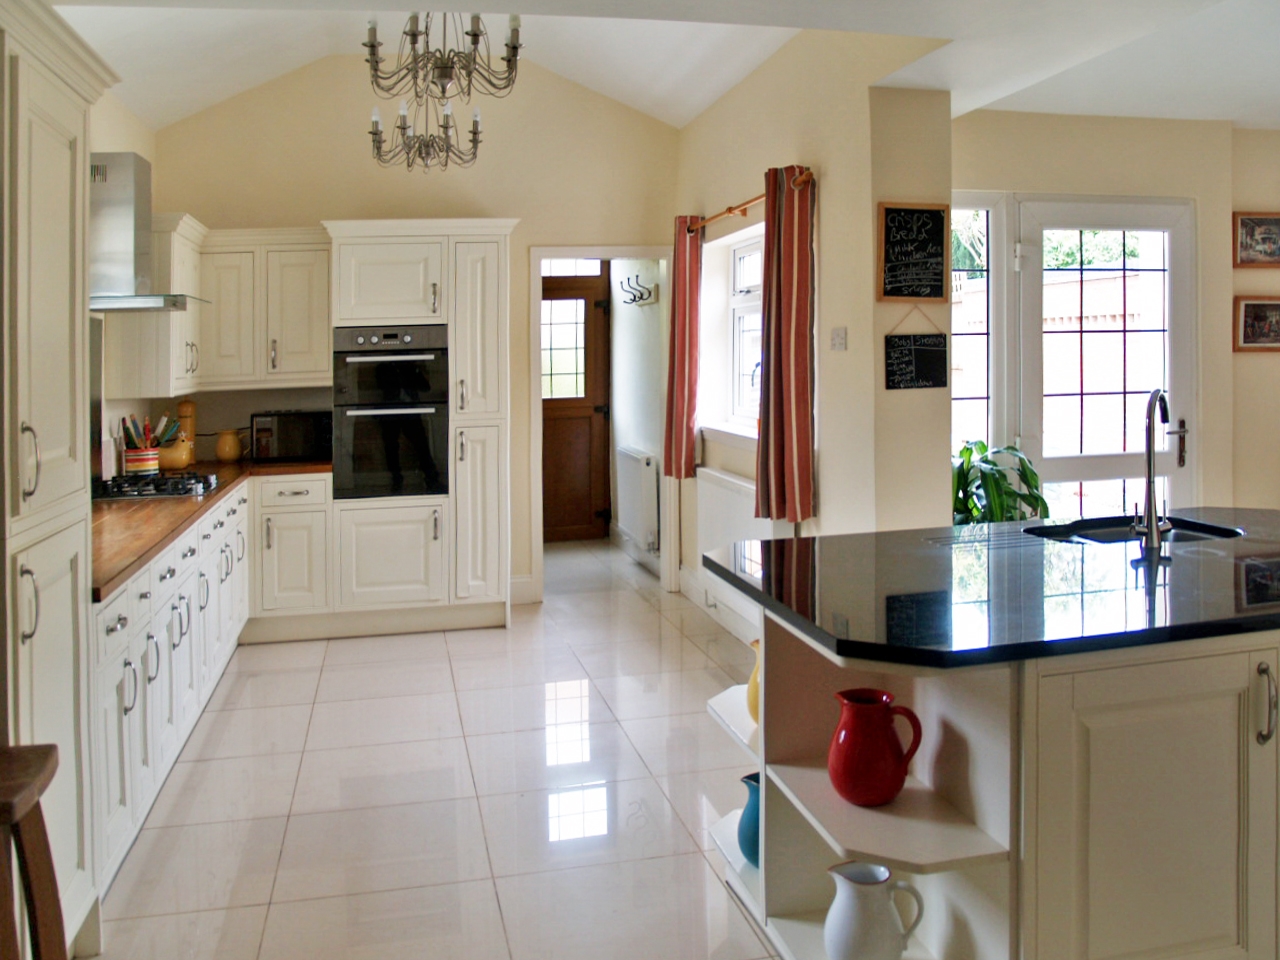 4 bedroom detached house SSTC in Solihull - photograph 7.